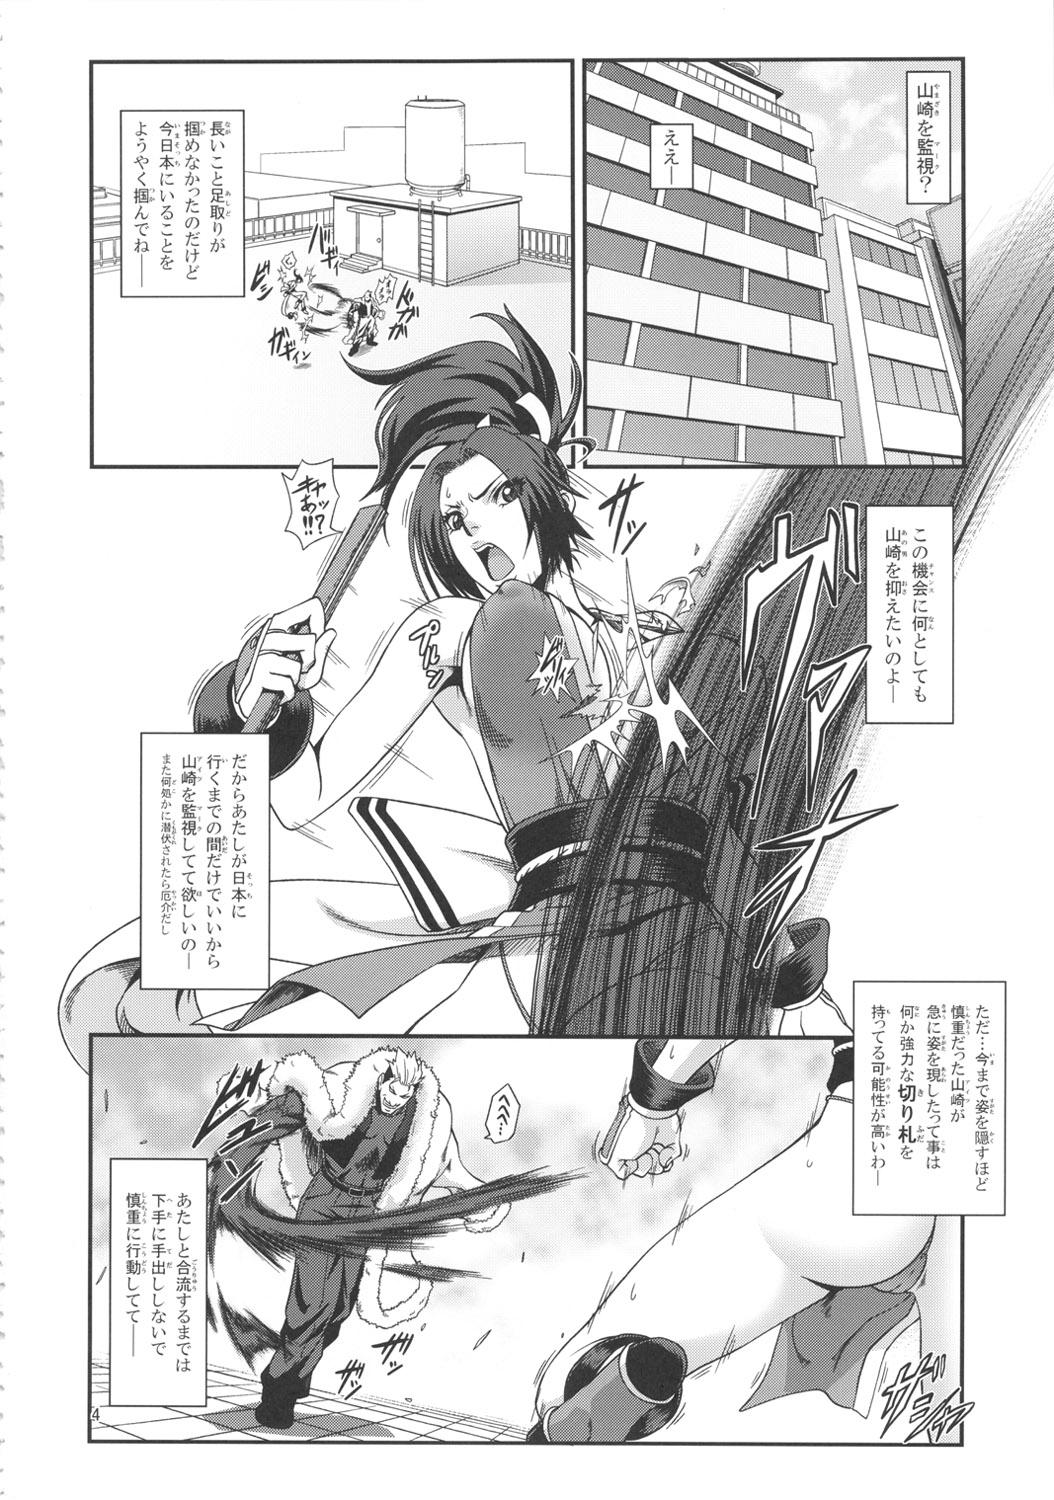 Perverted Shiranui Muzan 2 - King of fighters Fatal fury French Porn - Page 3